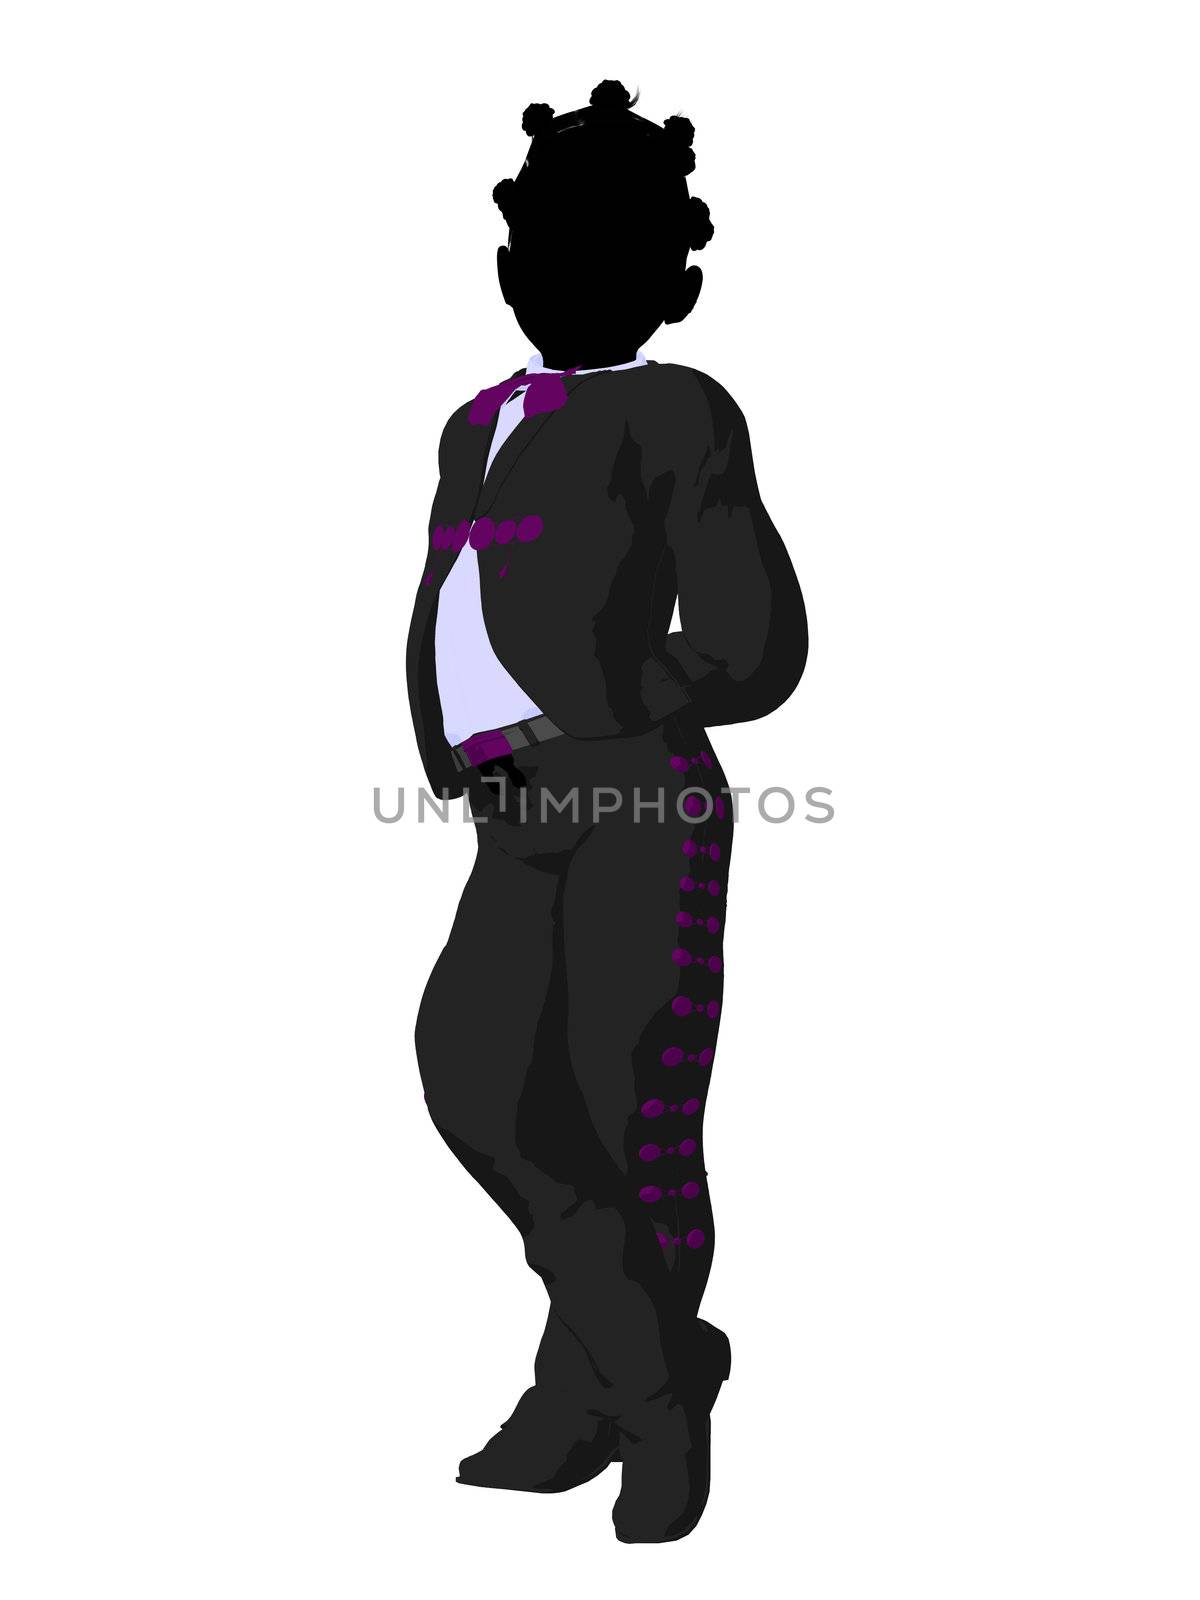 African American Girl Mariachi Silhouette Illustration by kathygold